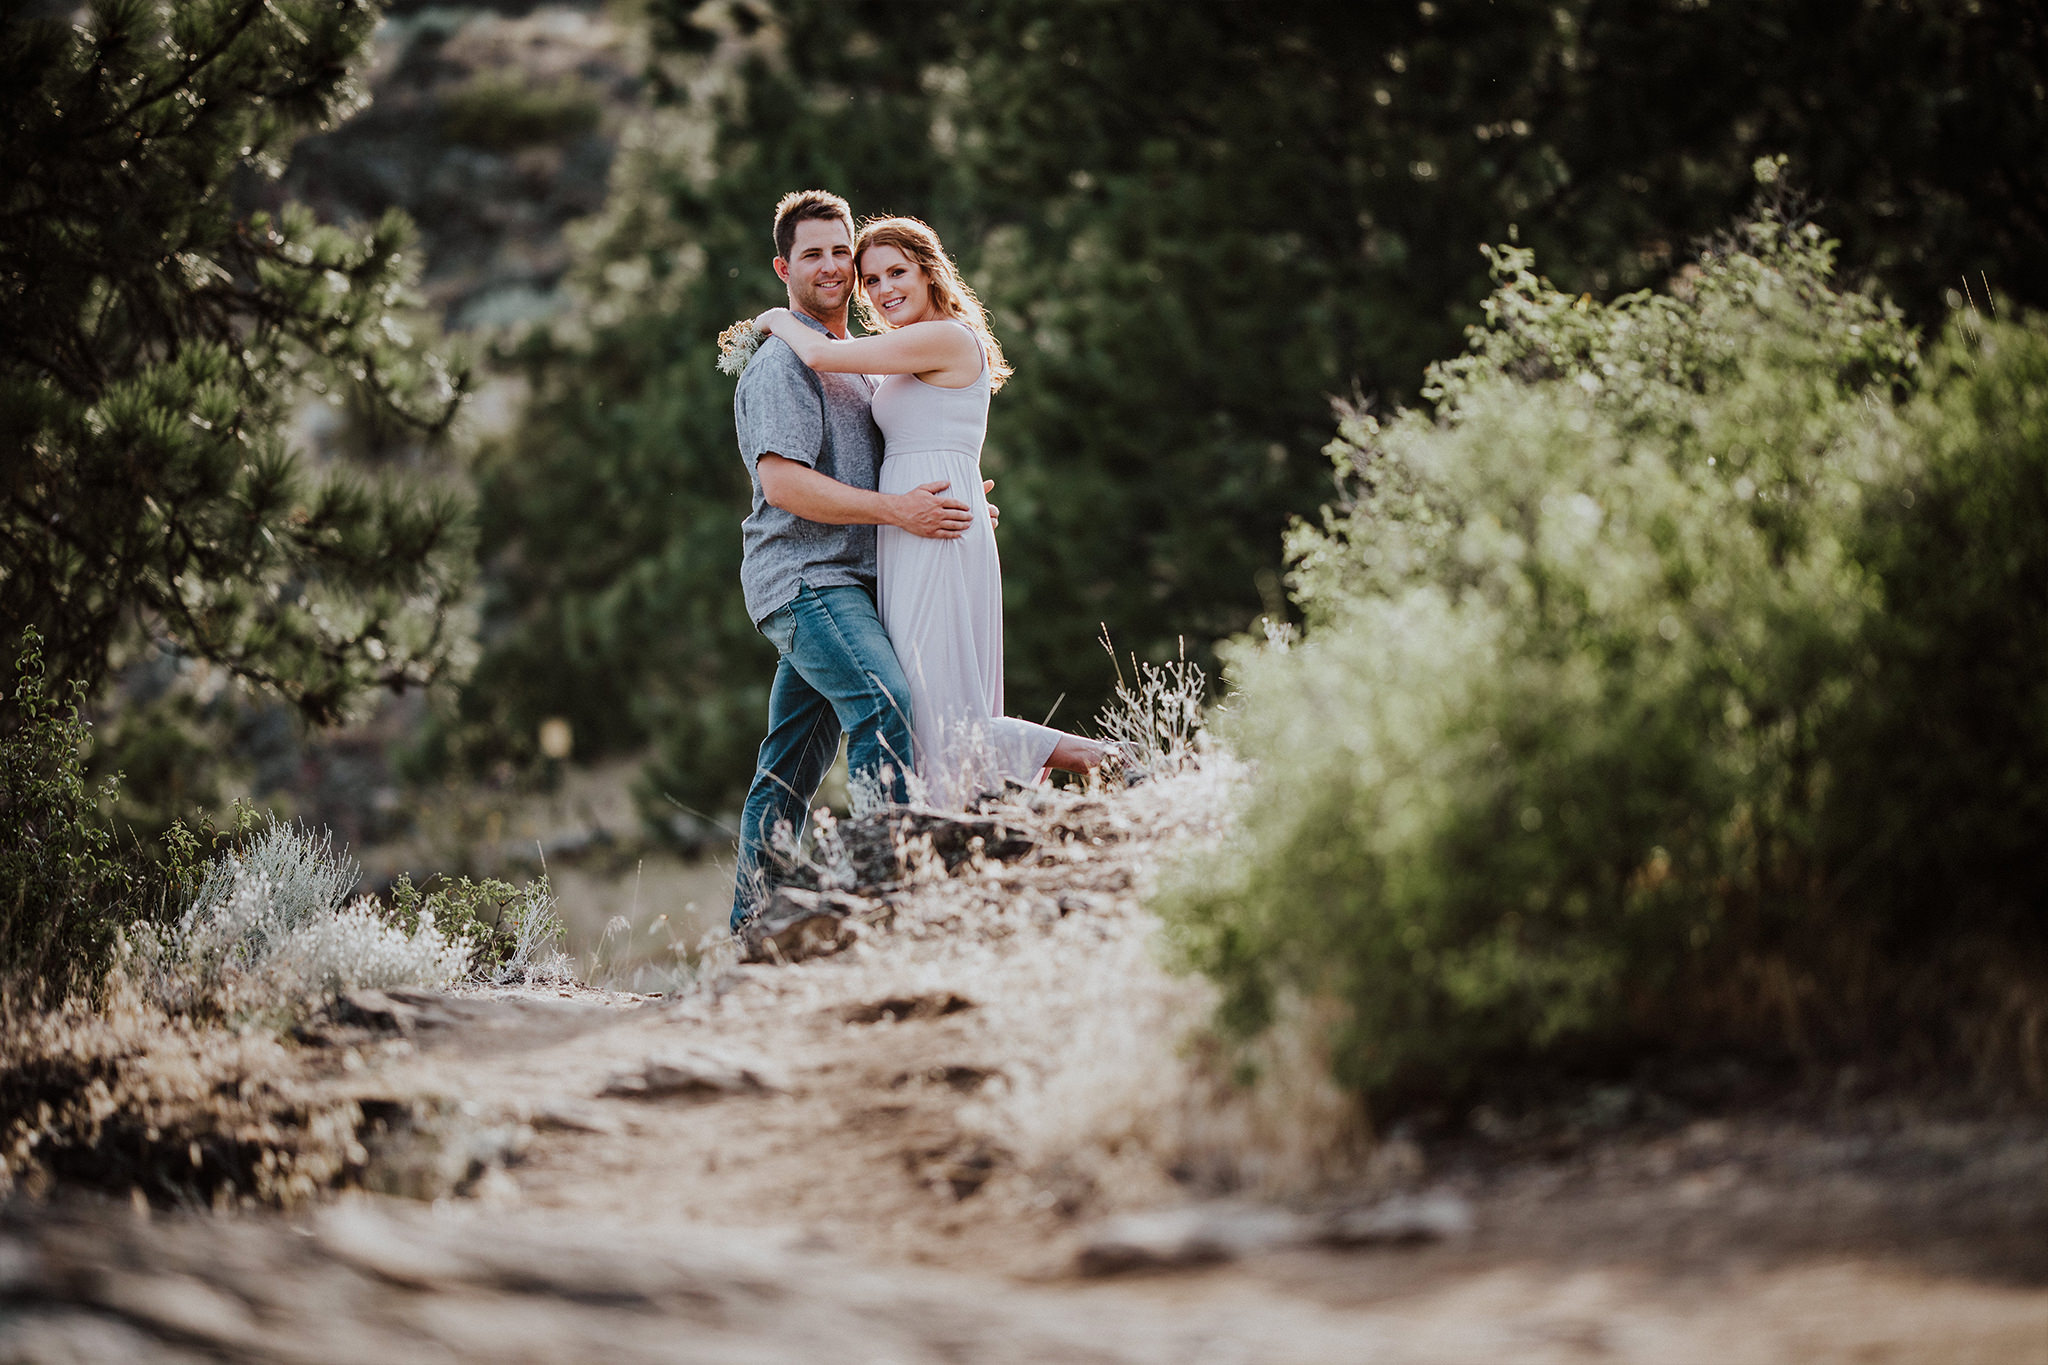 Couple poses for a photo while walking along a dirt path